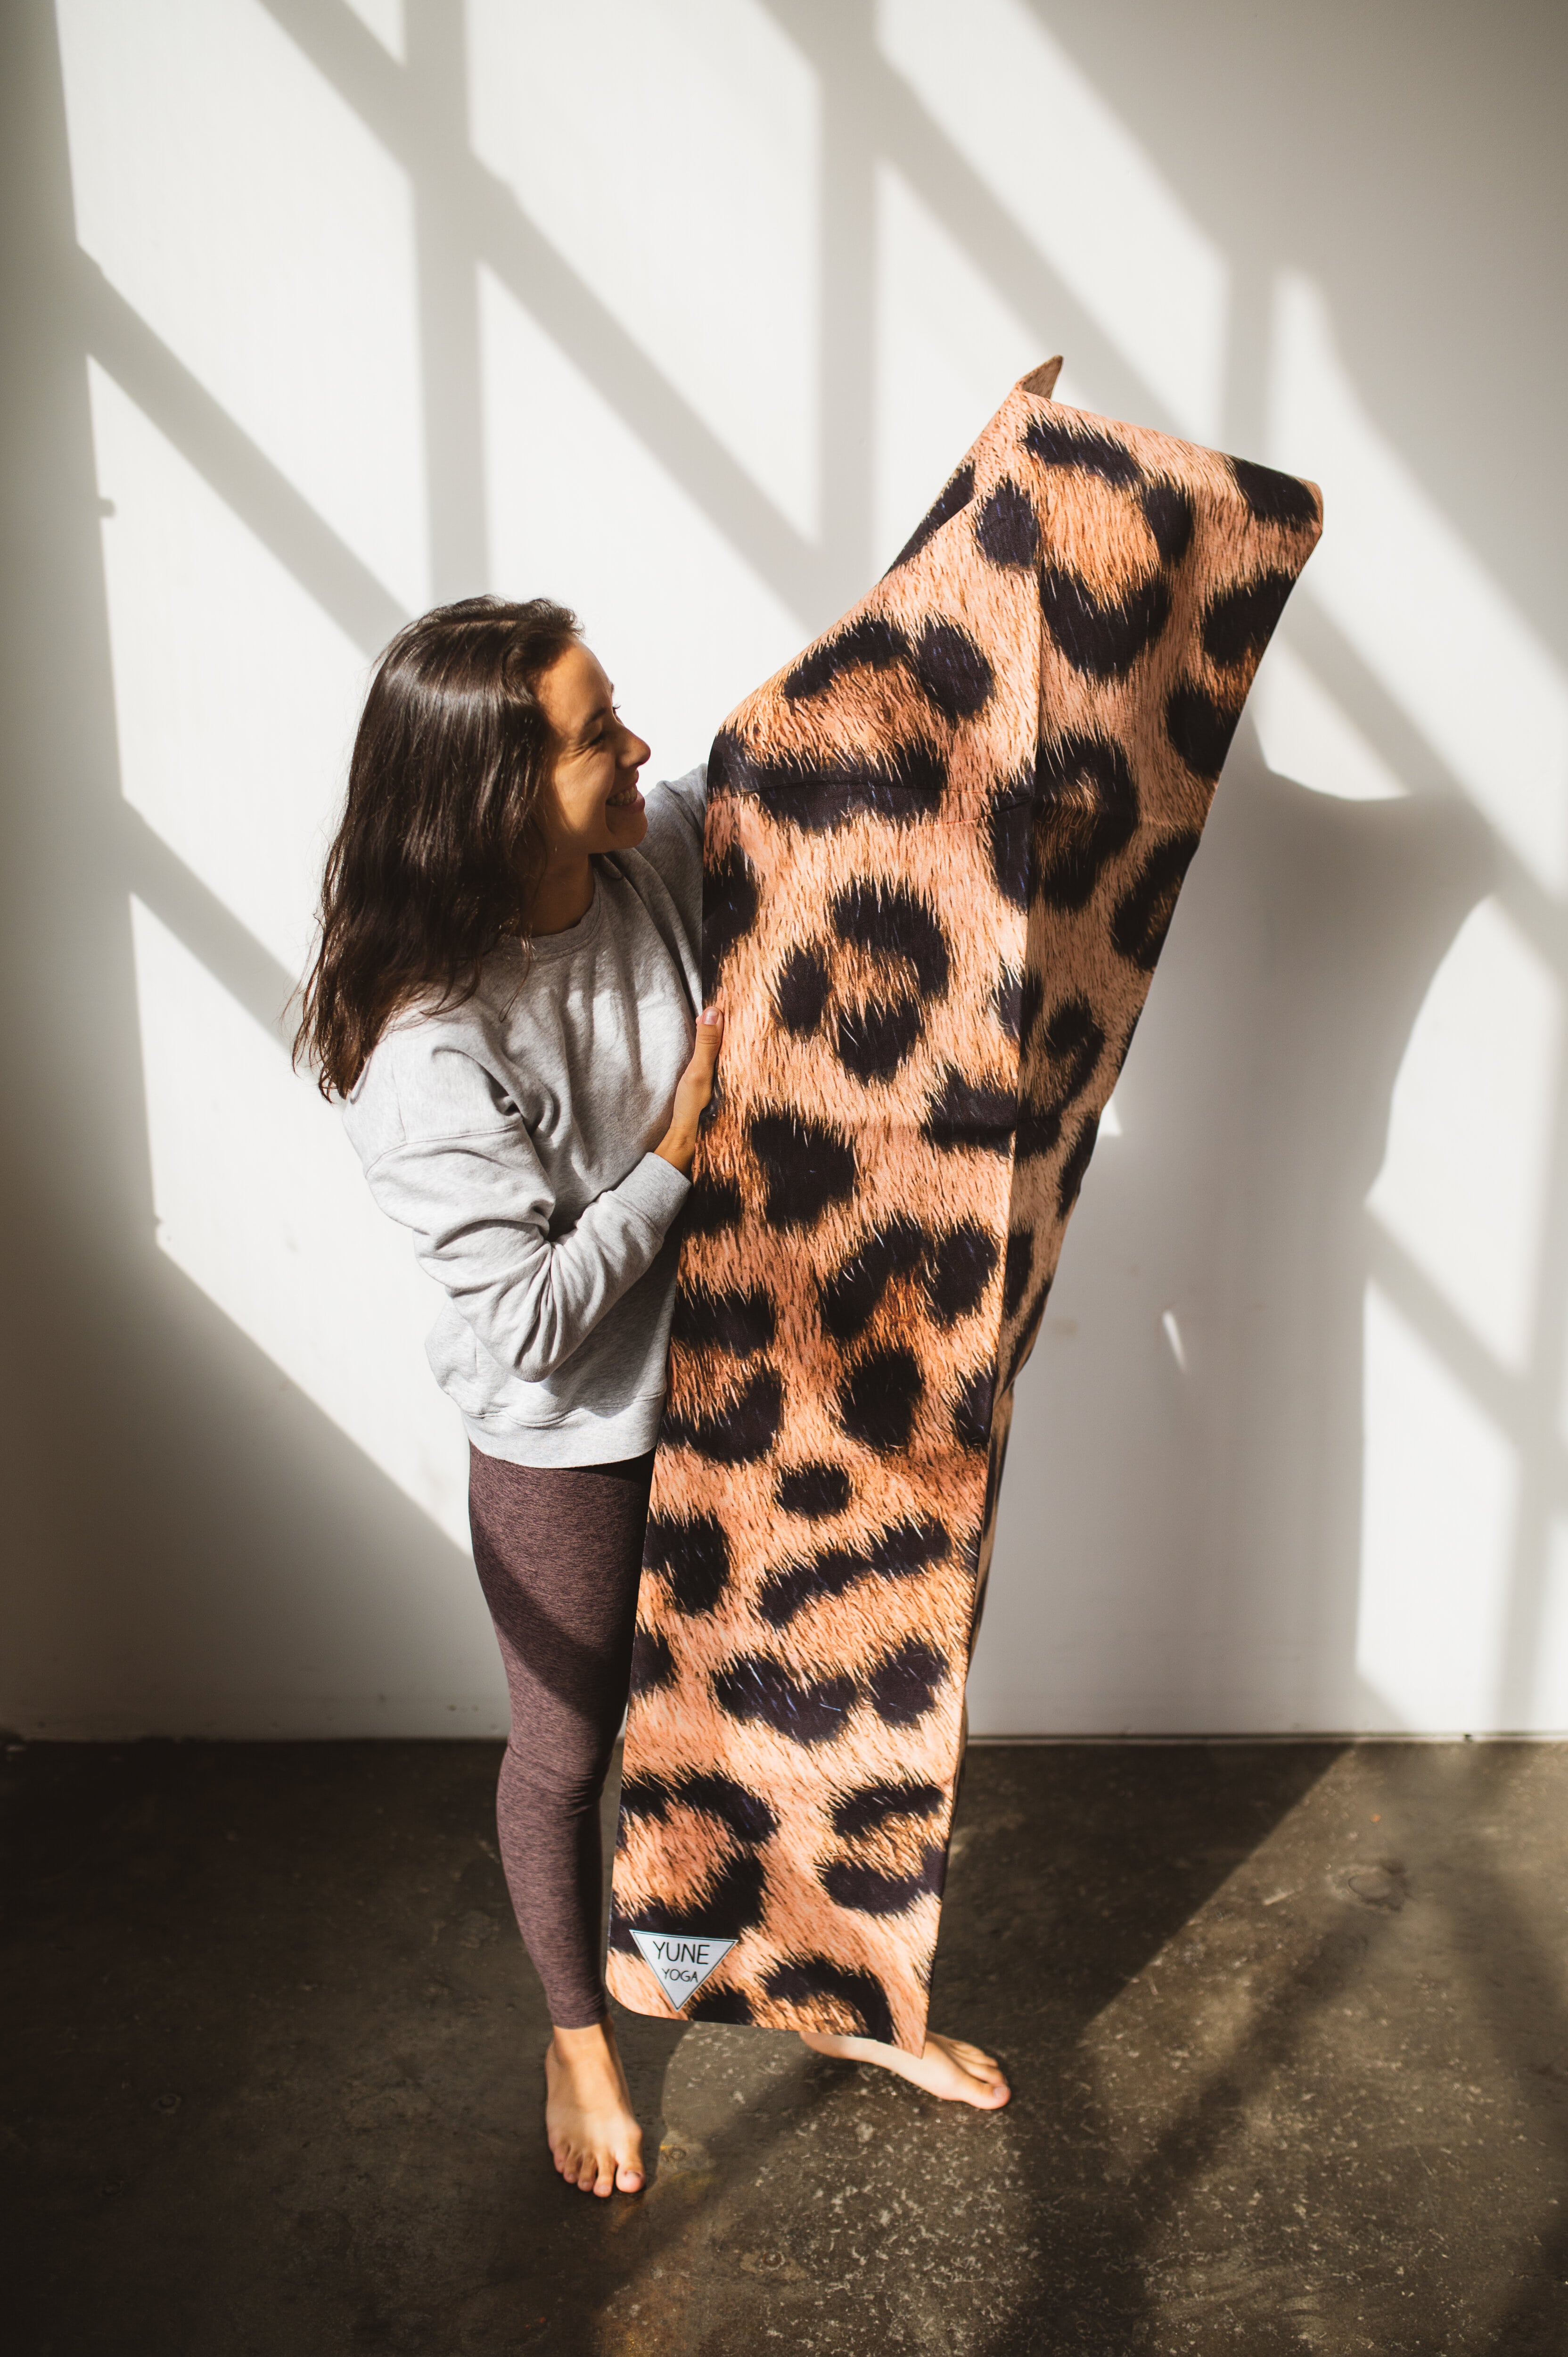 Yoga Mat - Natural Leopard - AMP Wellbeing - INYDY